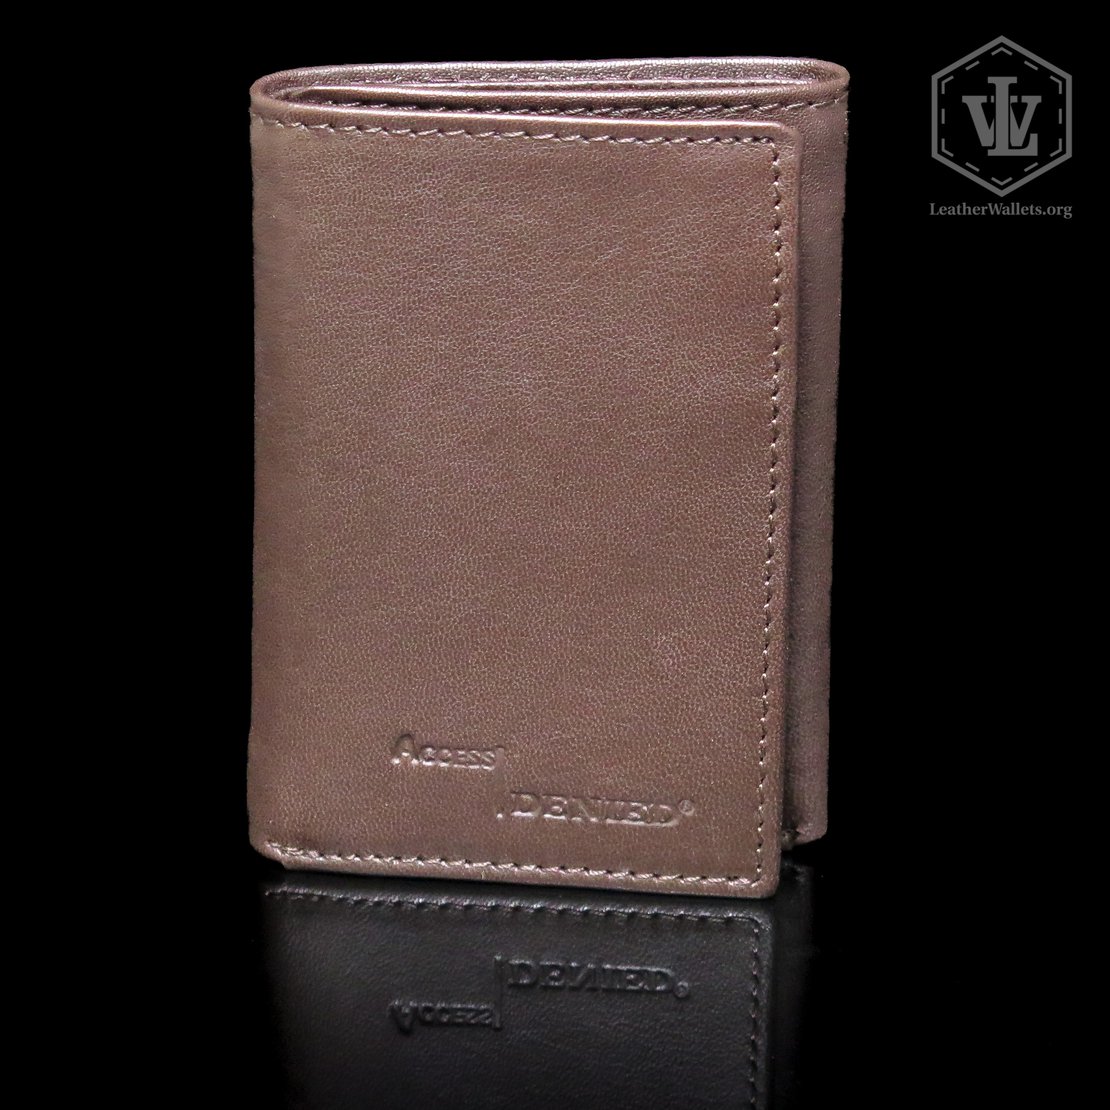  Access Denied Genuine Leather Checkbook Cover For